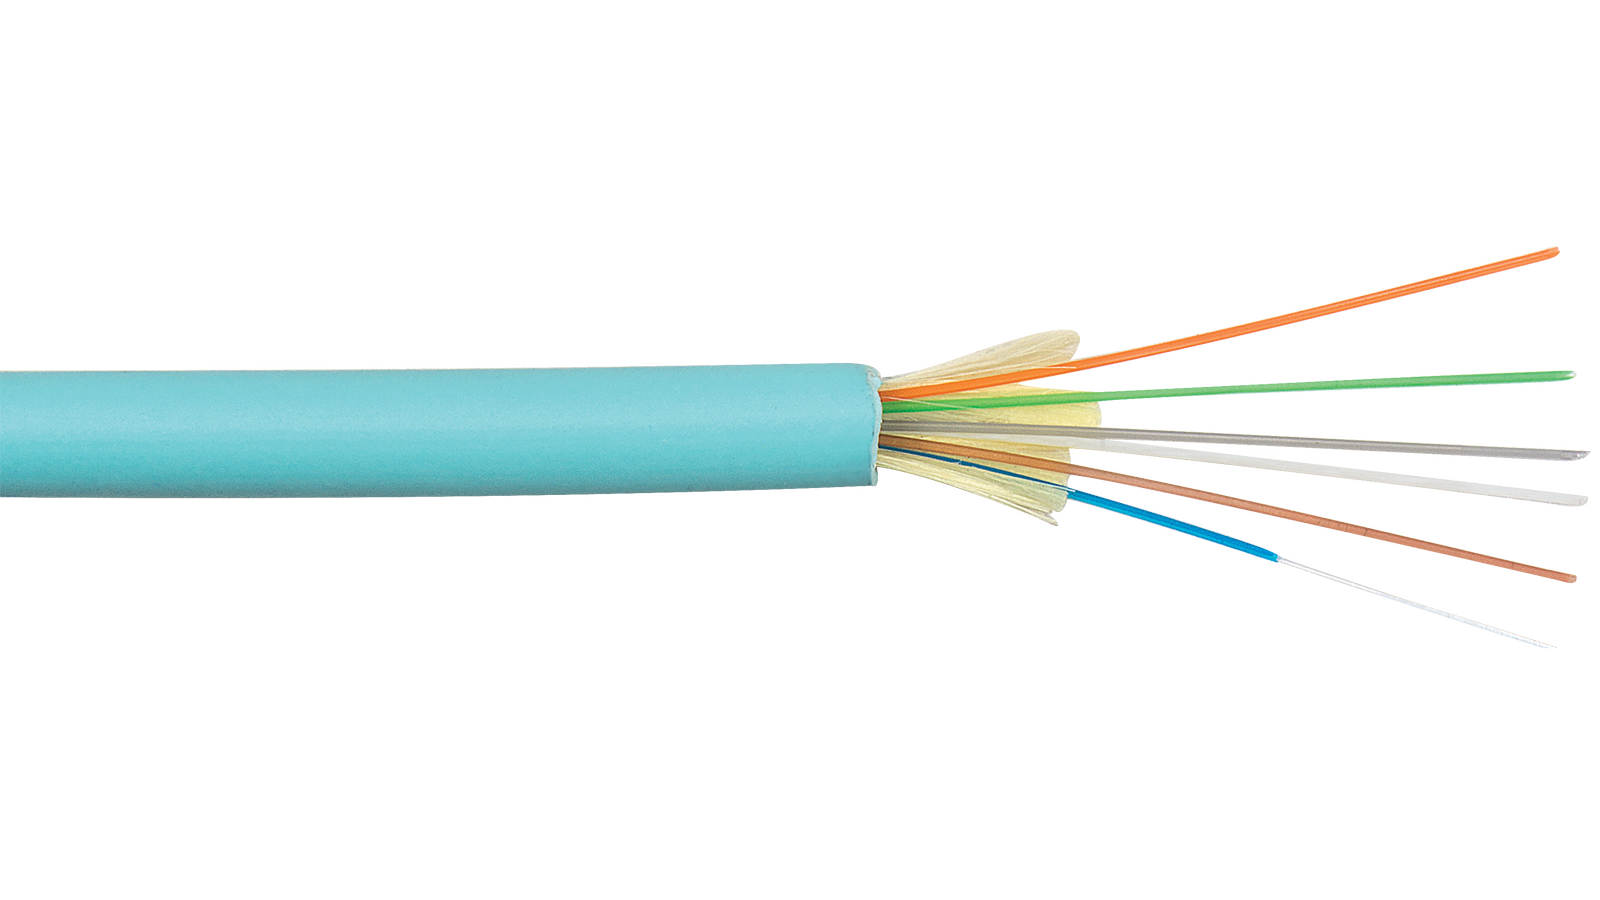 distribution cable